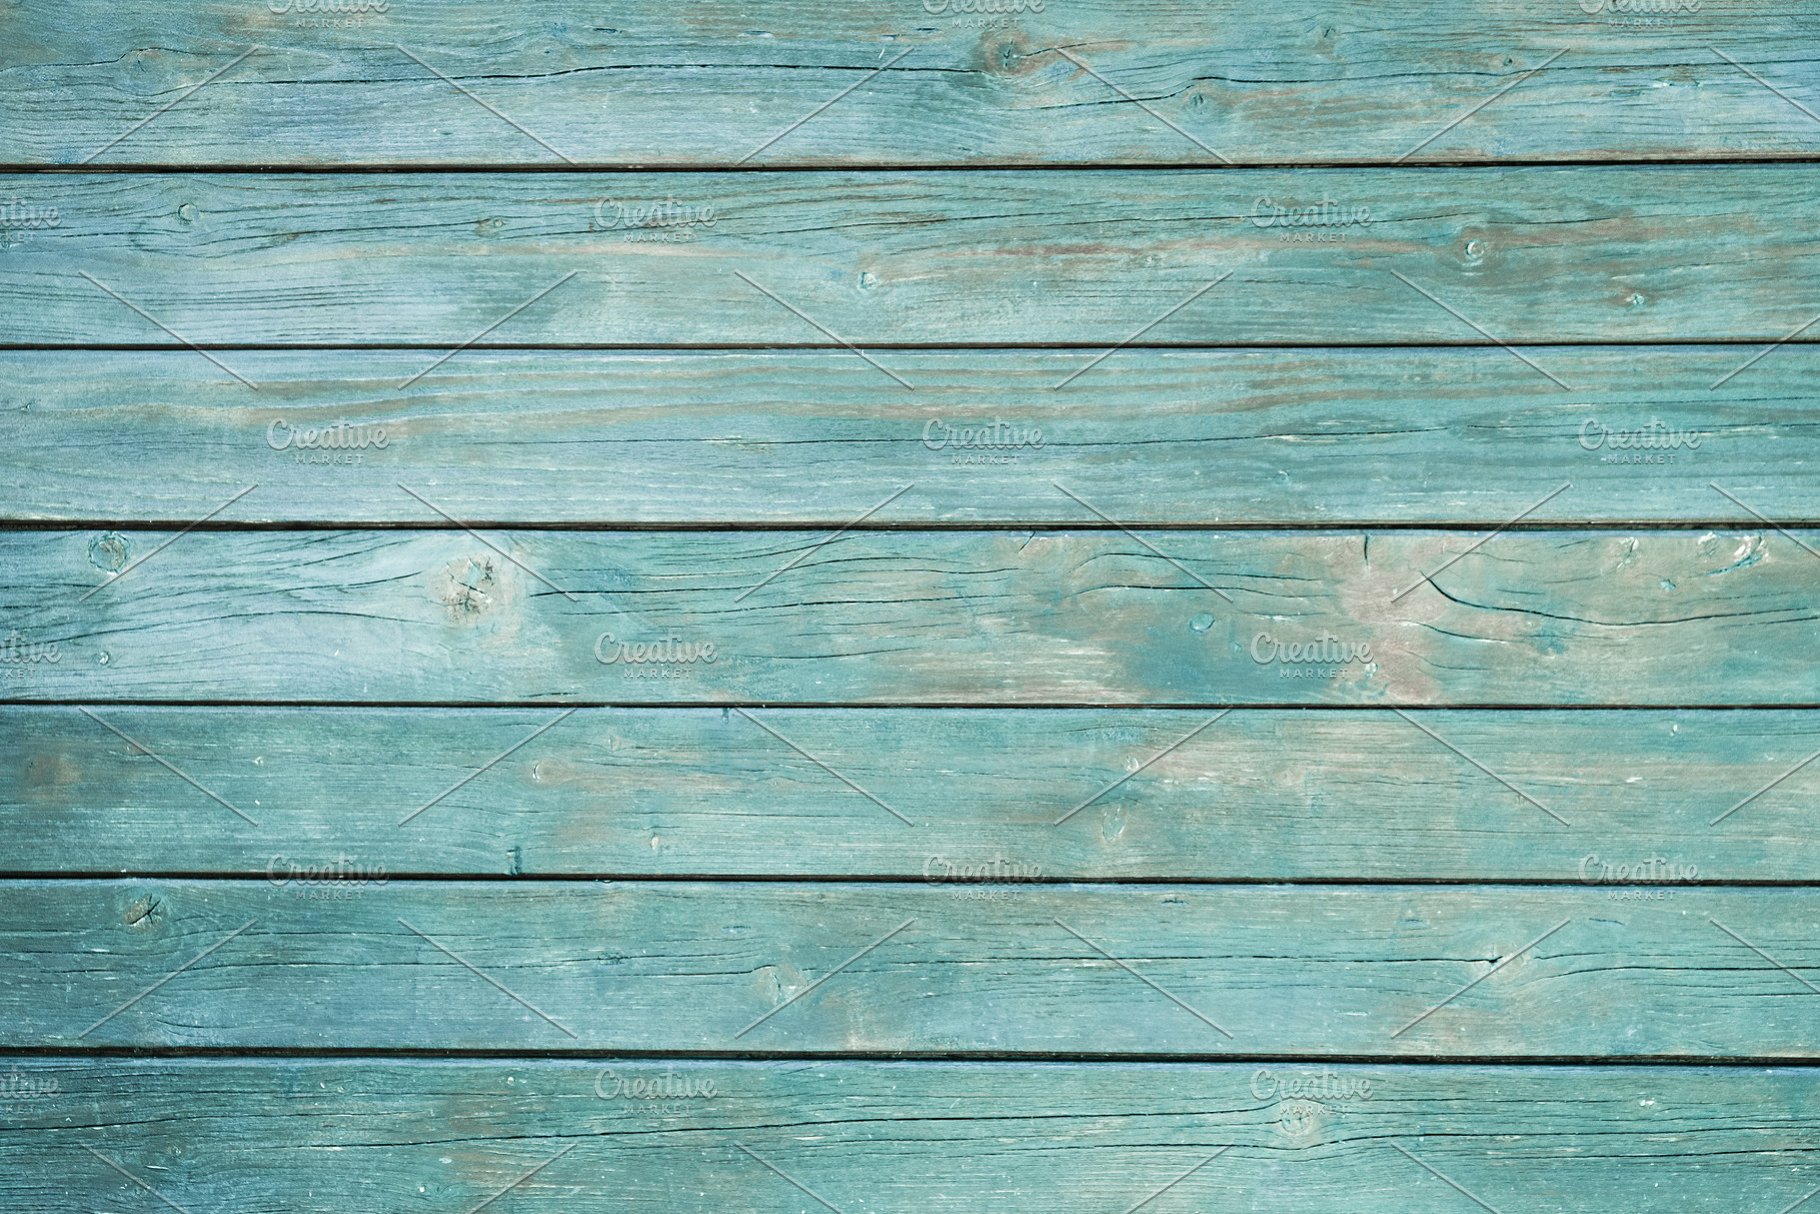 Teal Vintage Wooden Background High Quality Abstract Stock 1820x1214